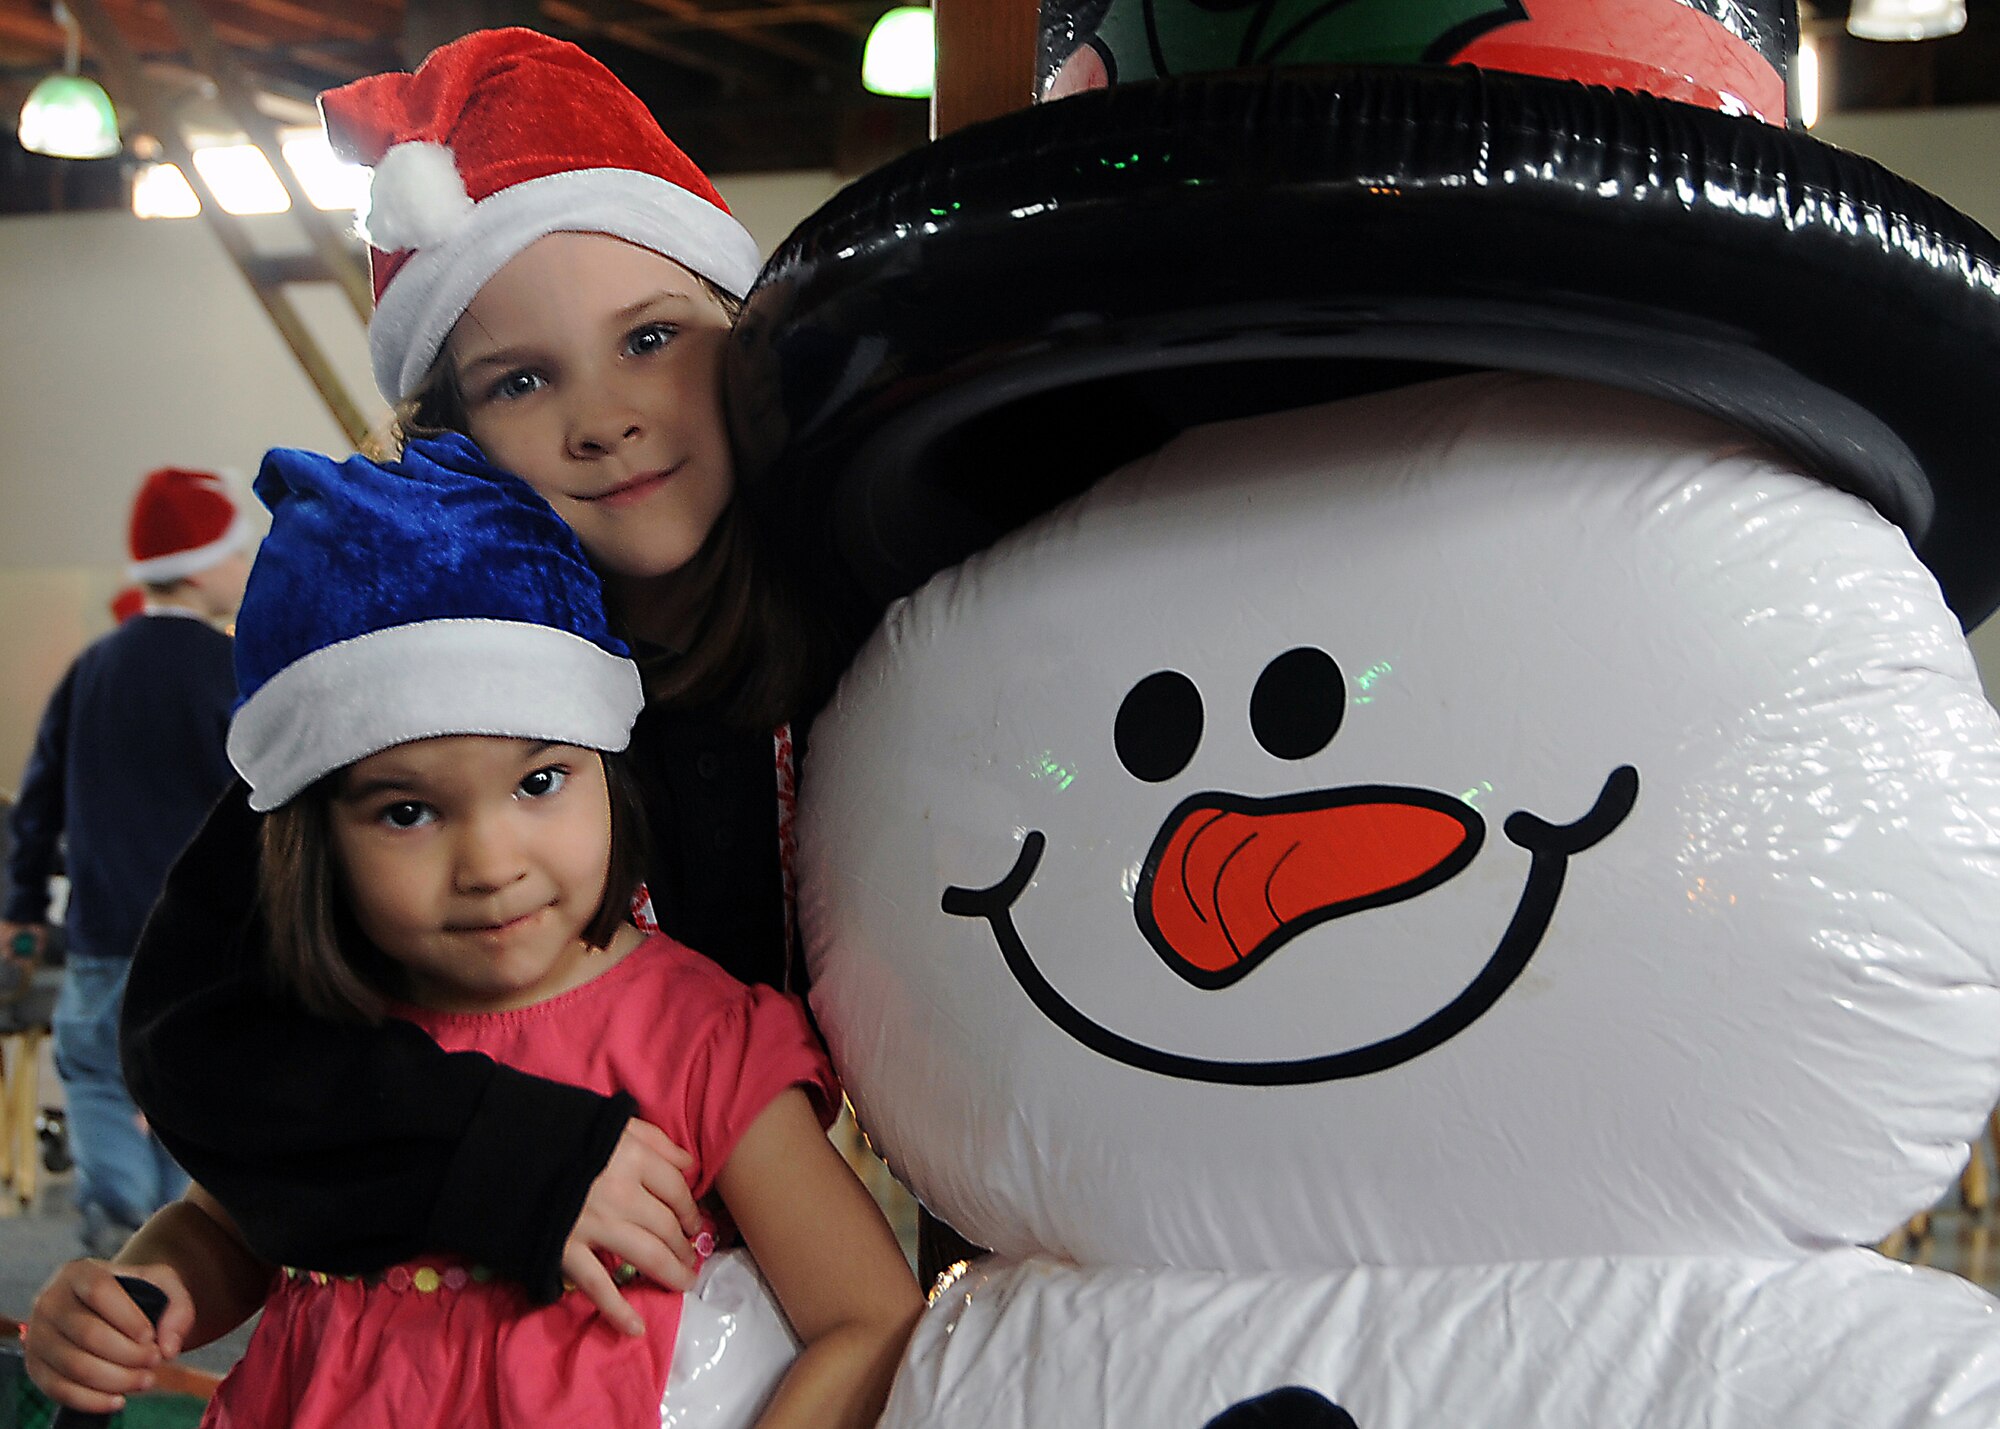 Athena and Ariel Ruiz pose with Frosty during the “Candy Land” children’s holiday celebration at Fort MacArthur Hall, San Pedro, Calif., Dec. 12. Los Angeles Air Force Base’s Youth Programs provided food, fun and games for children ages 2-11. (Photo by Joe Juarez)